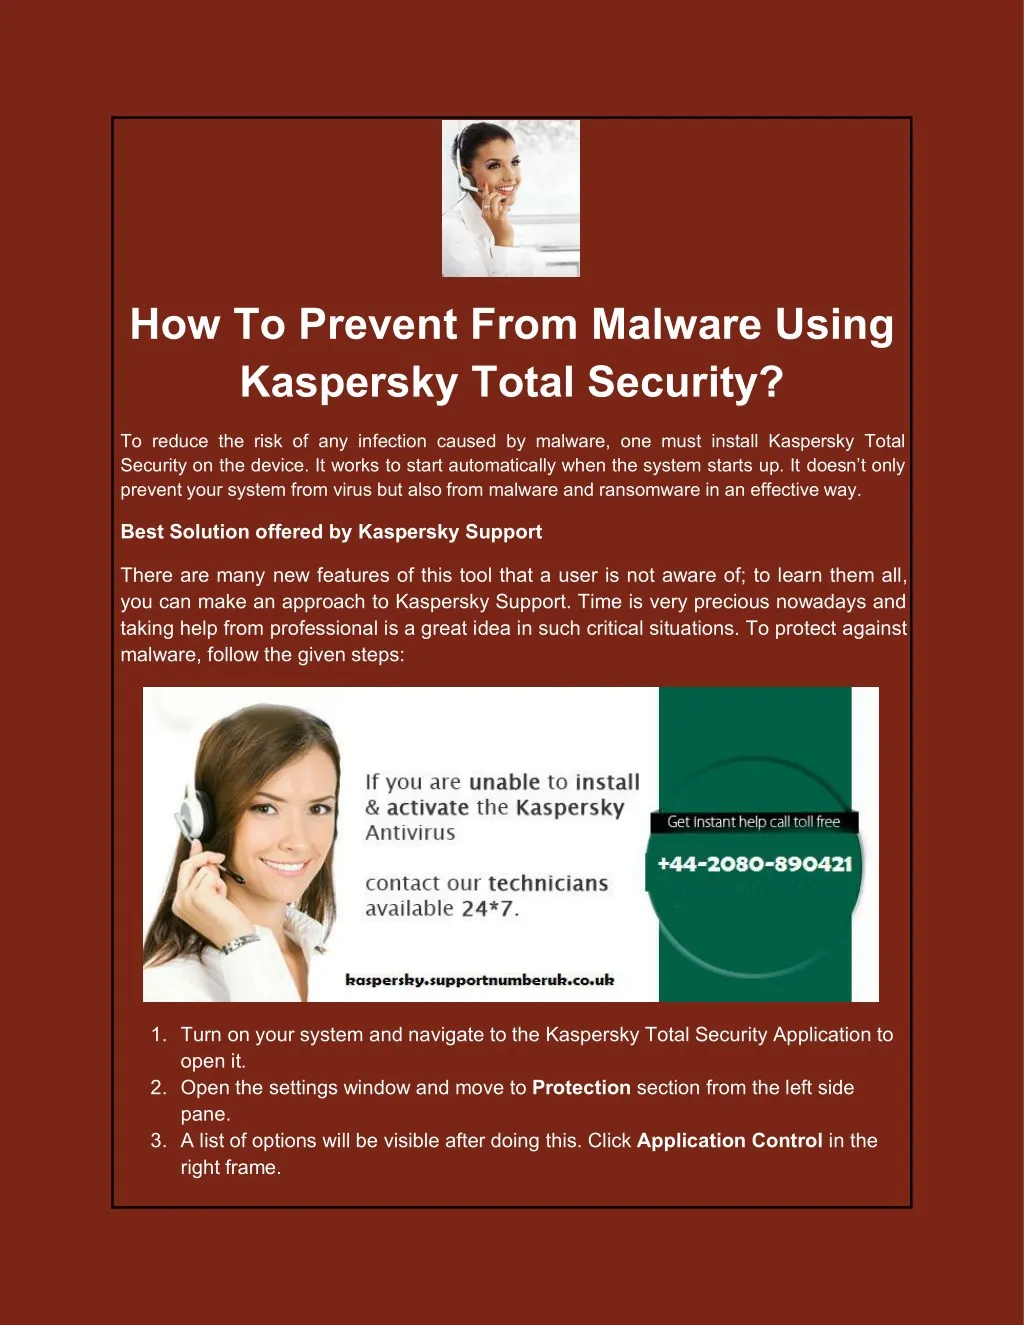 how to prevent from malware using kaspersky total